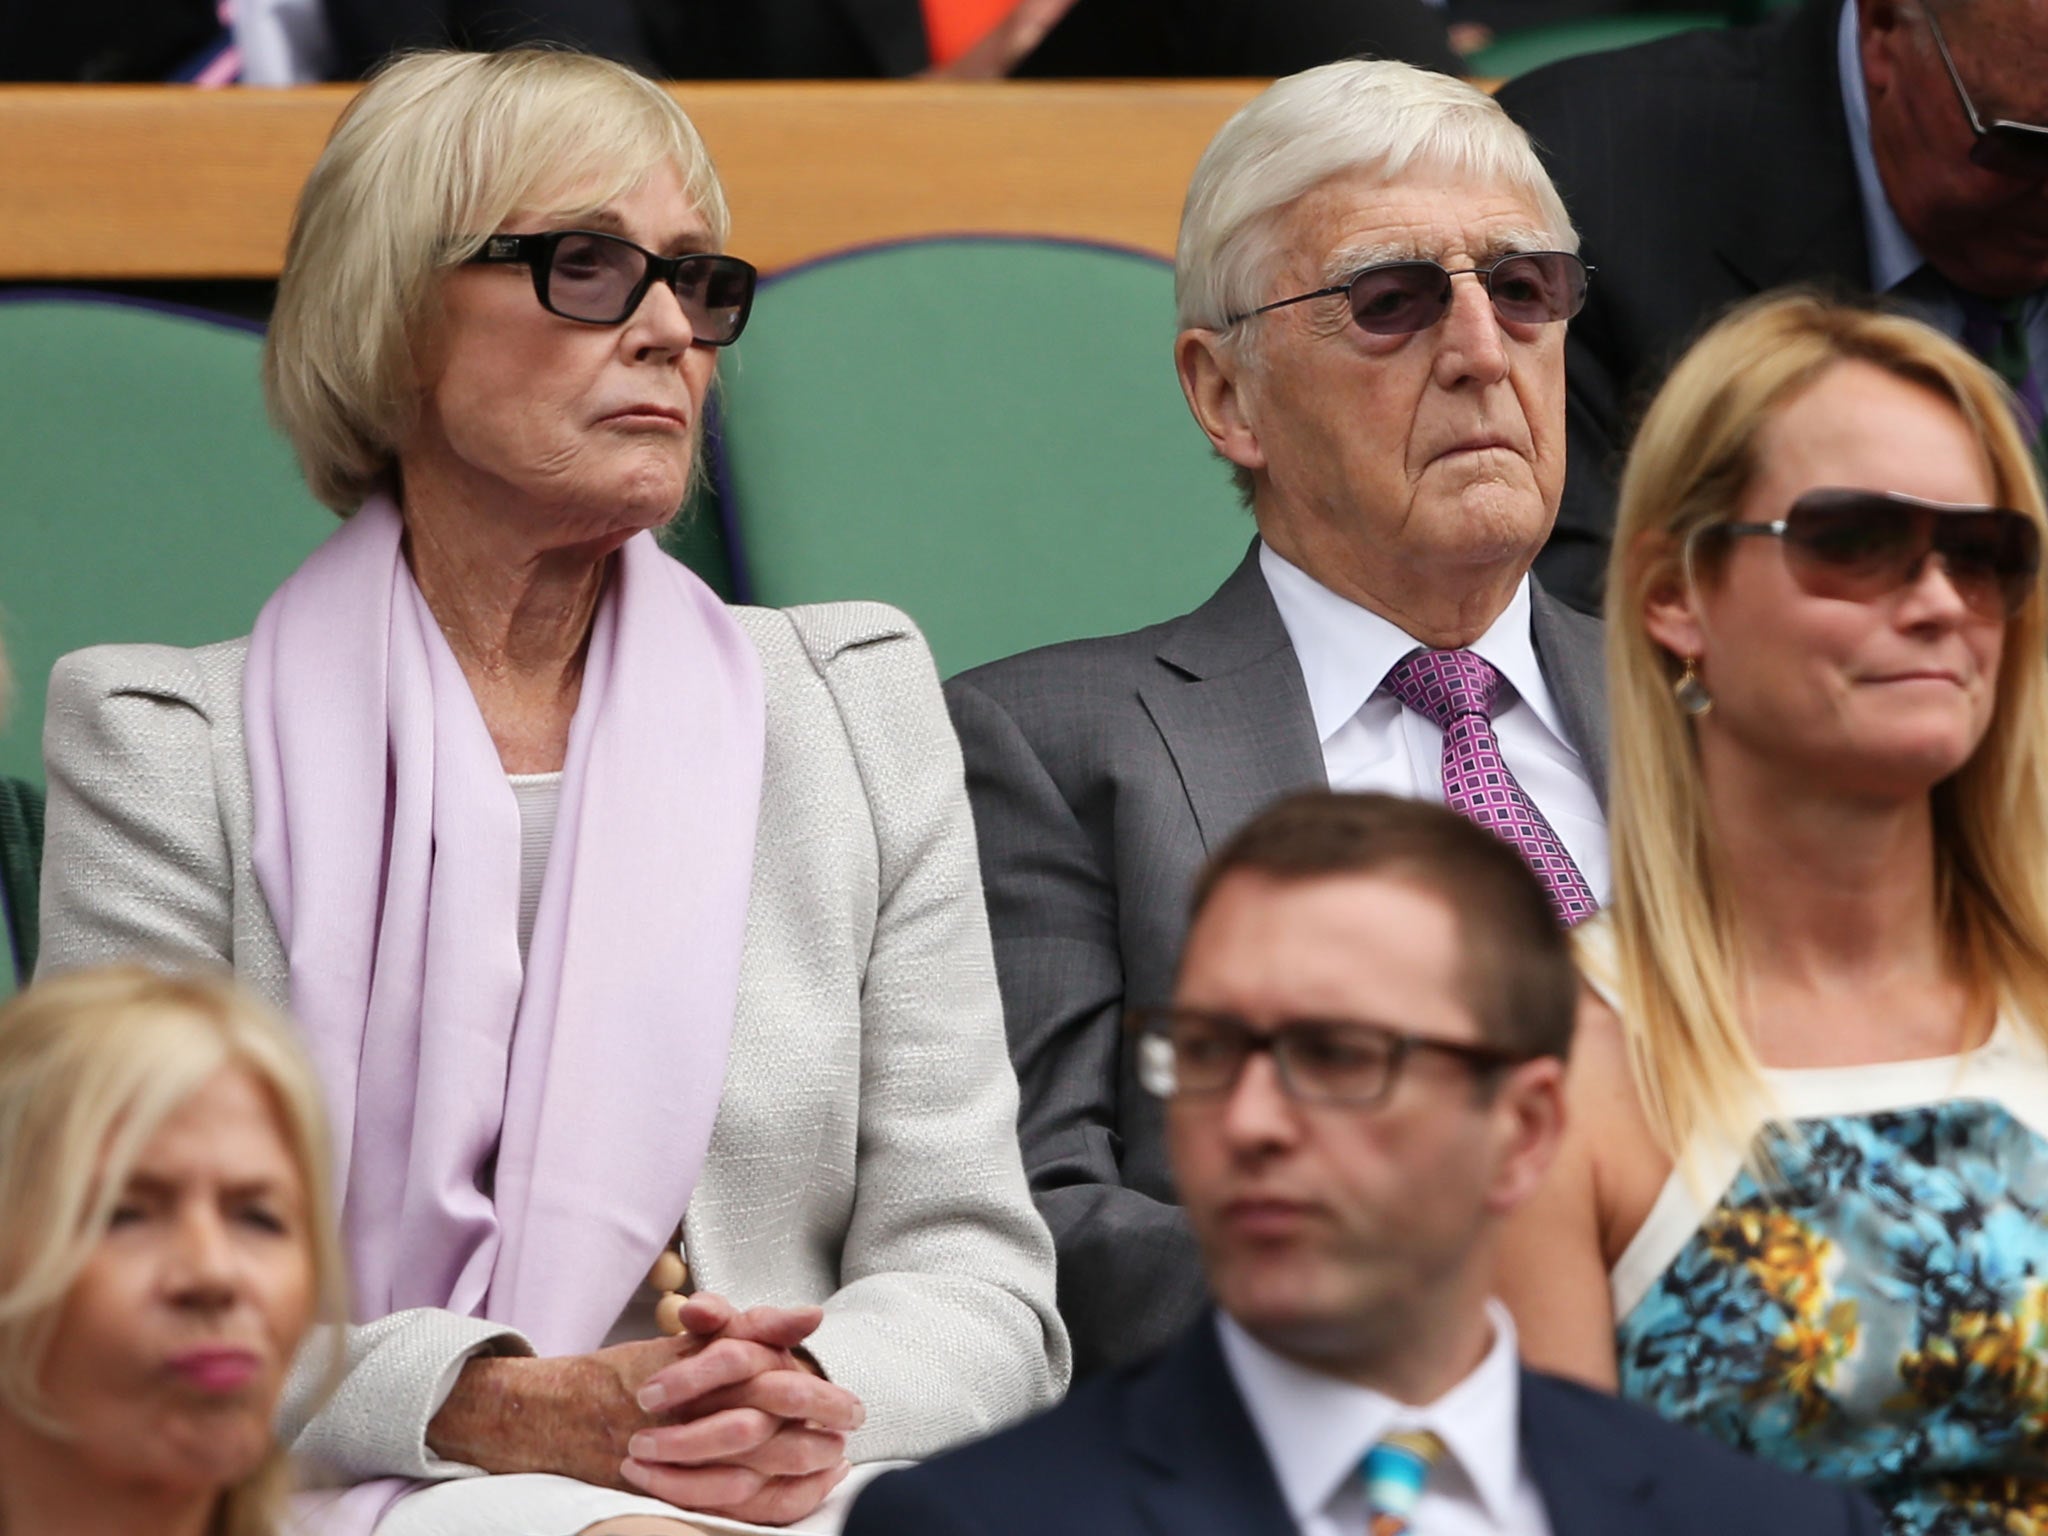 Sir Michael Parkinson and wife Mary in the Wimbledon crowd this week